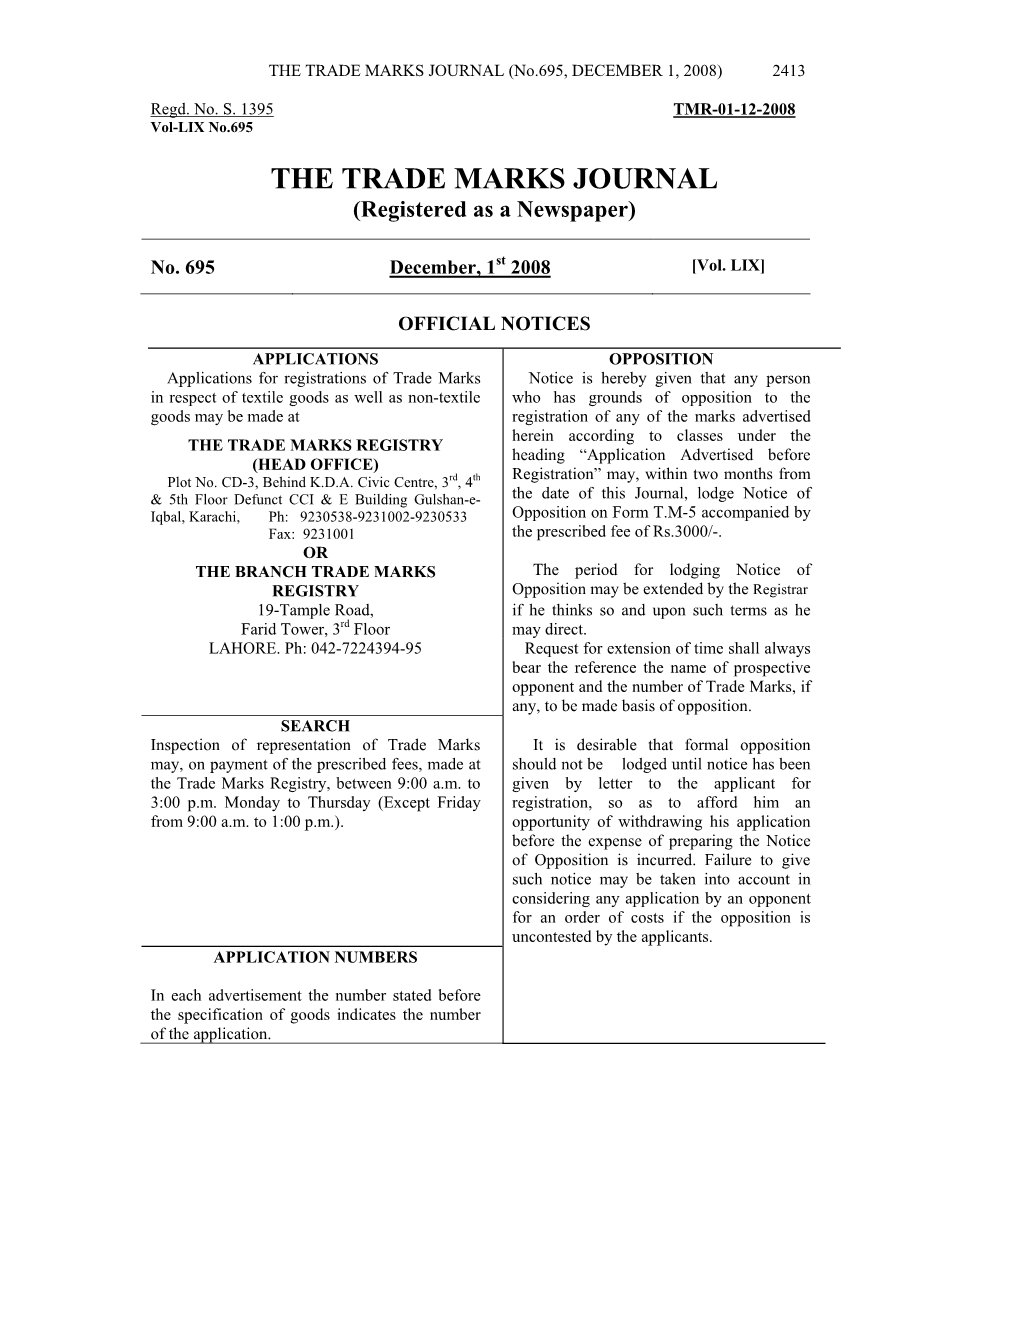 THE TRADE MARKS JOURNAL (No.695, DECEMBER 1, 2008) 2413